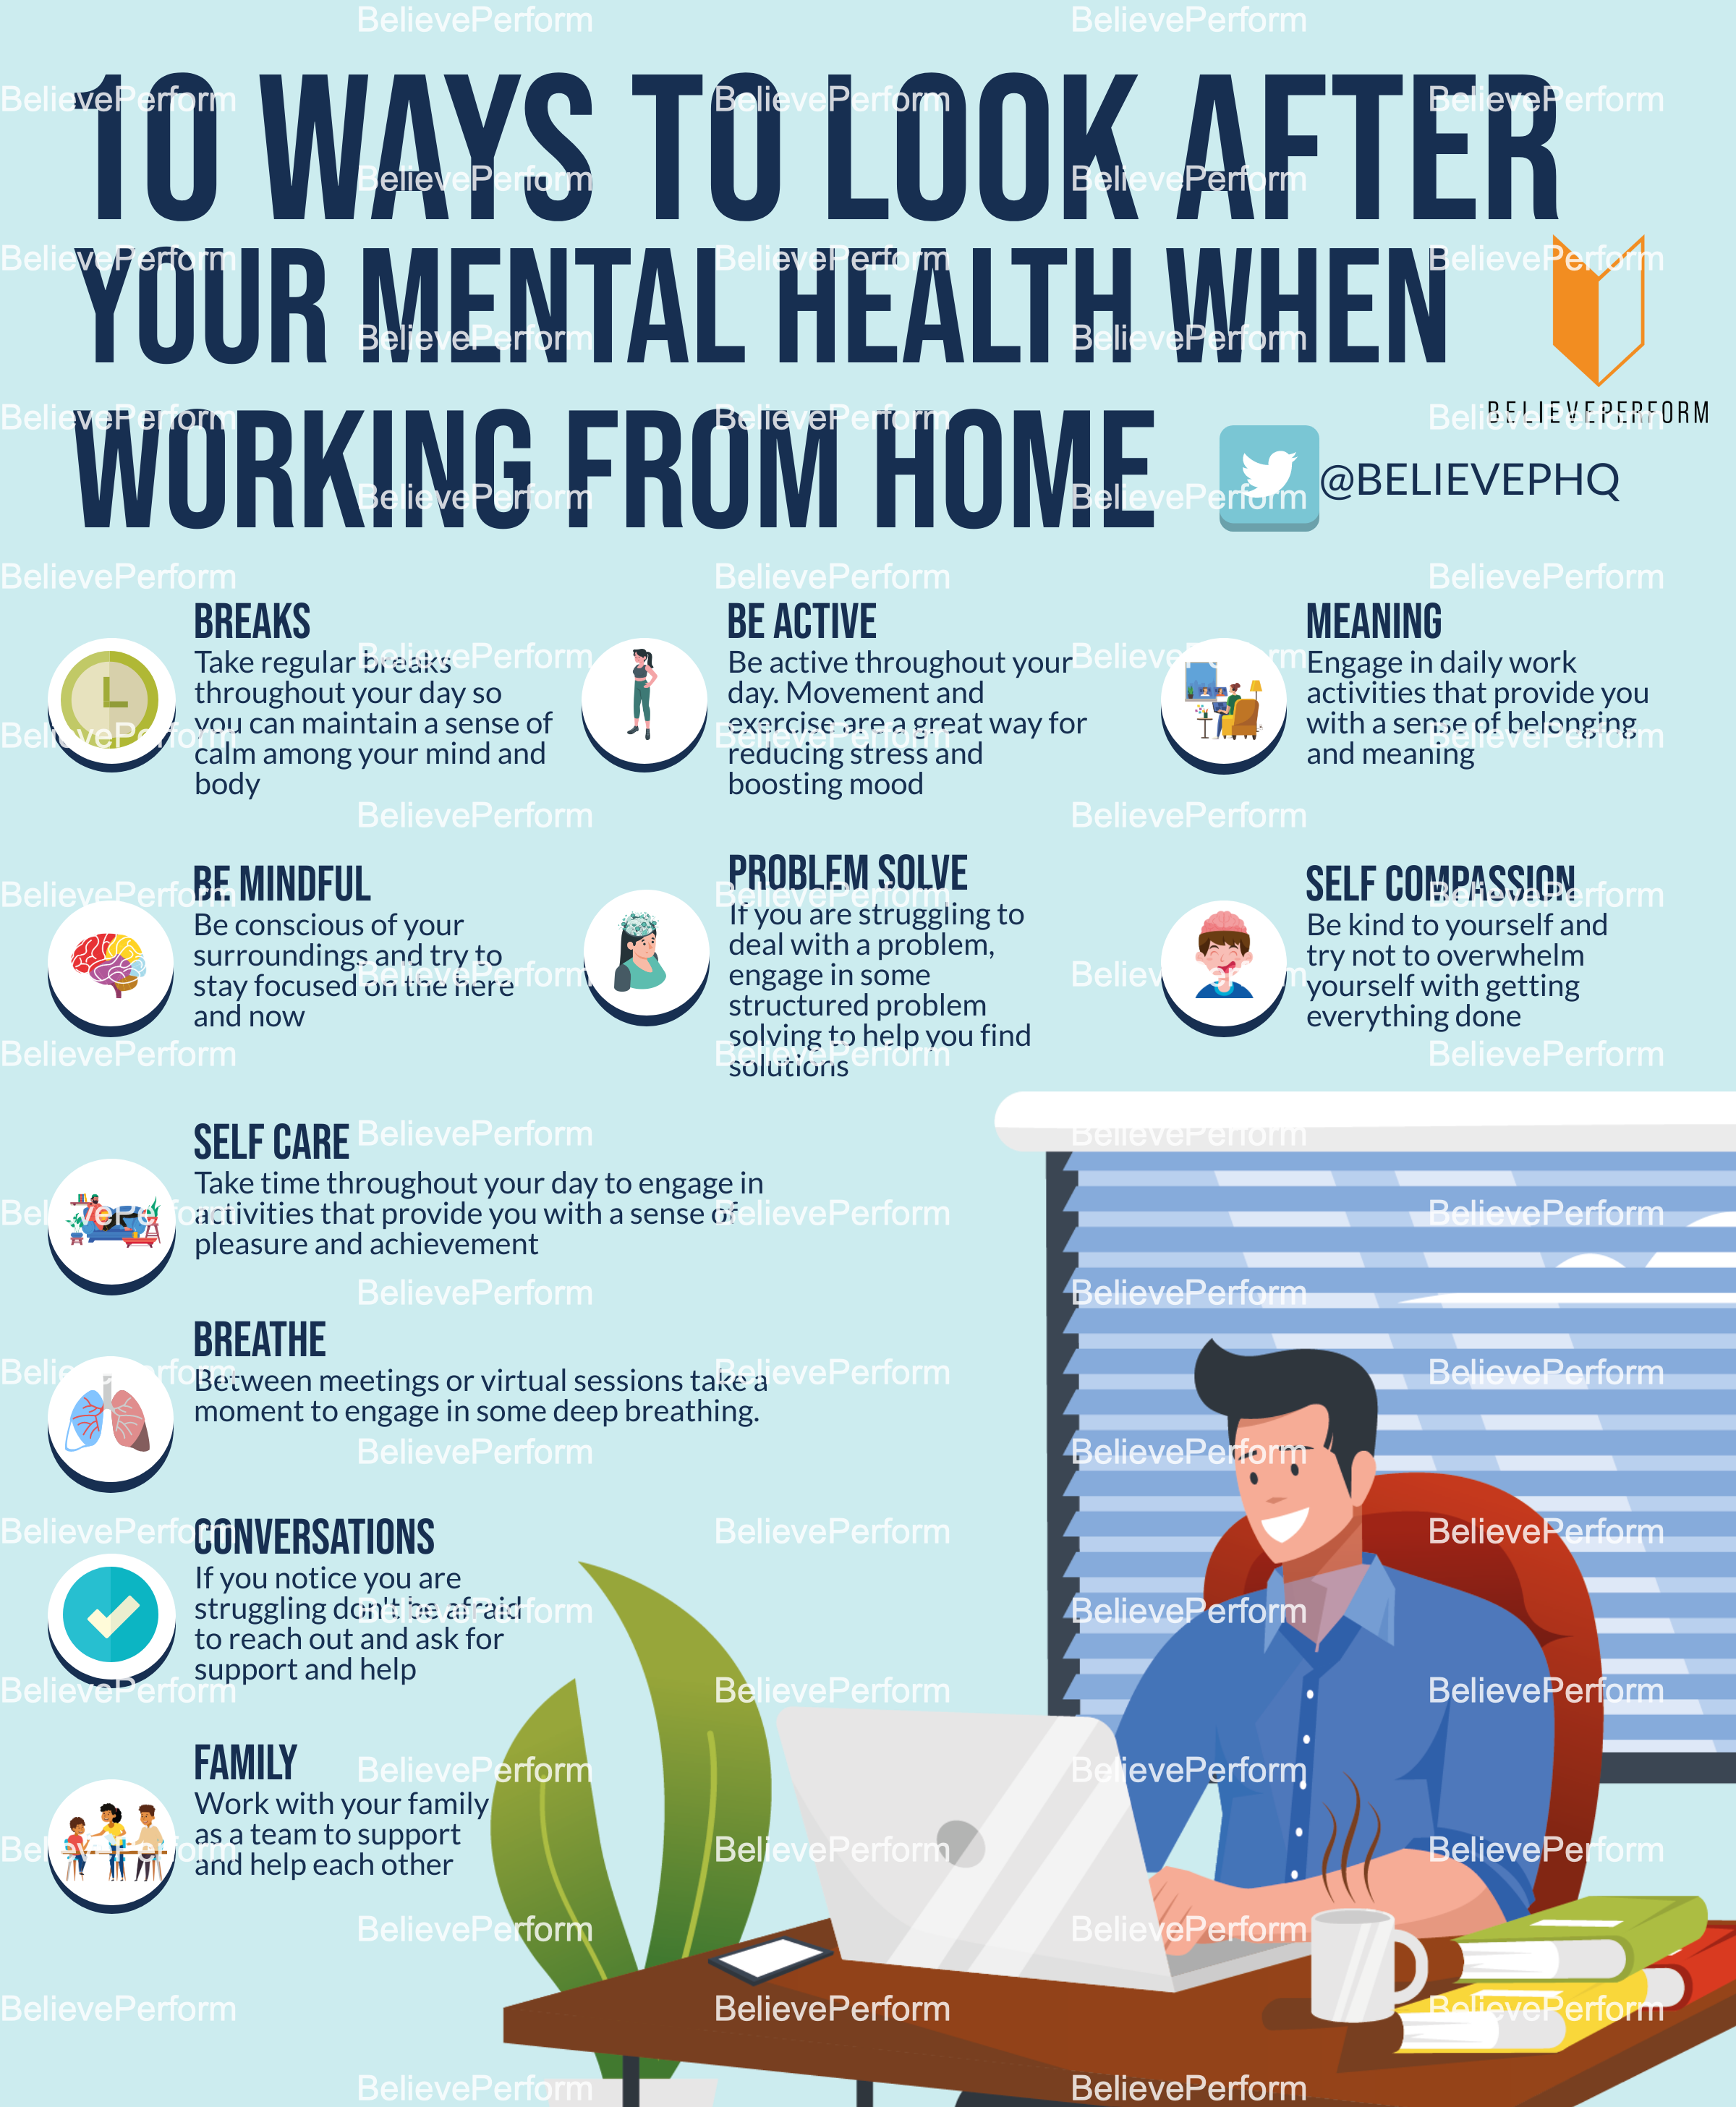 what mental health issues can homework cause